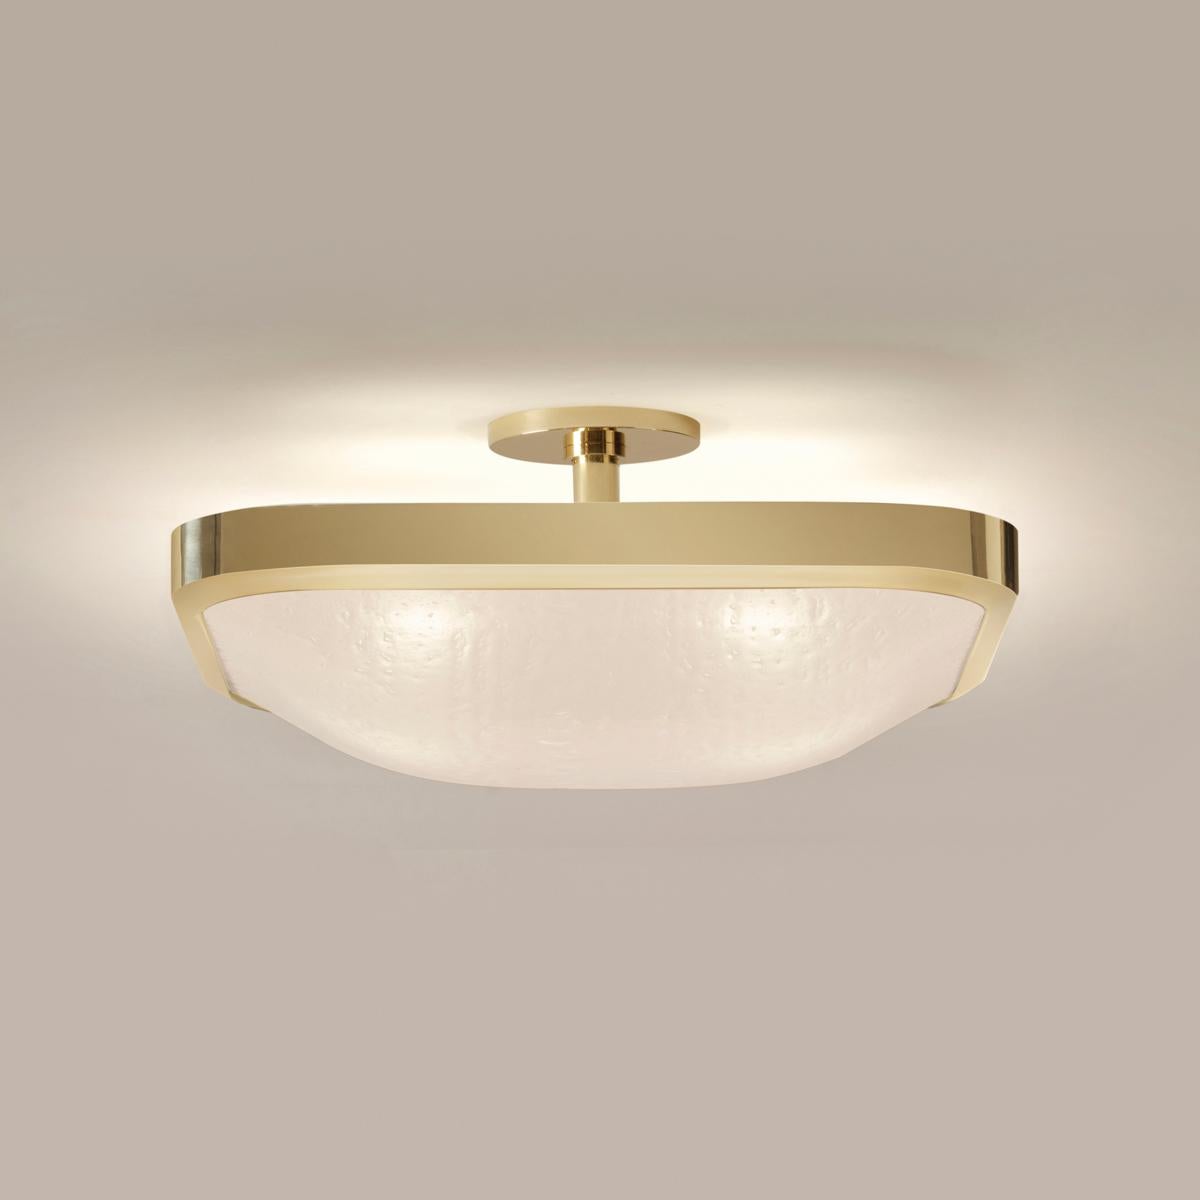 Uno Square Ceiling Light by Gaspare Asaro-Polished Nickel Finish In New Condition For Sale In New York, NY